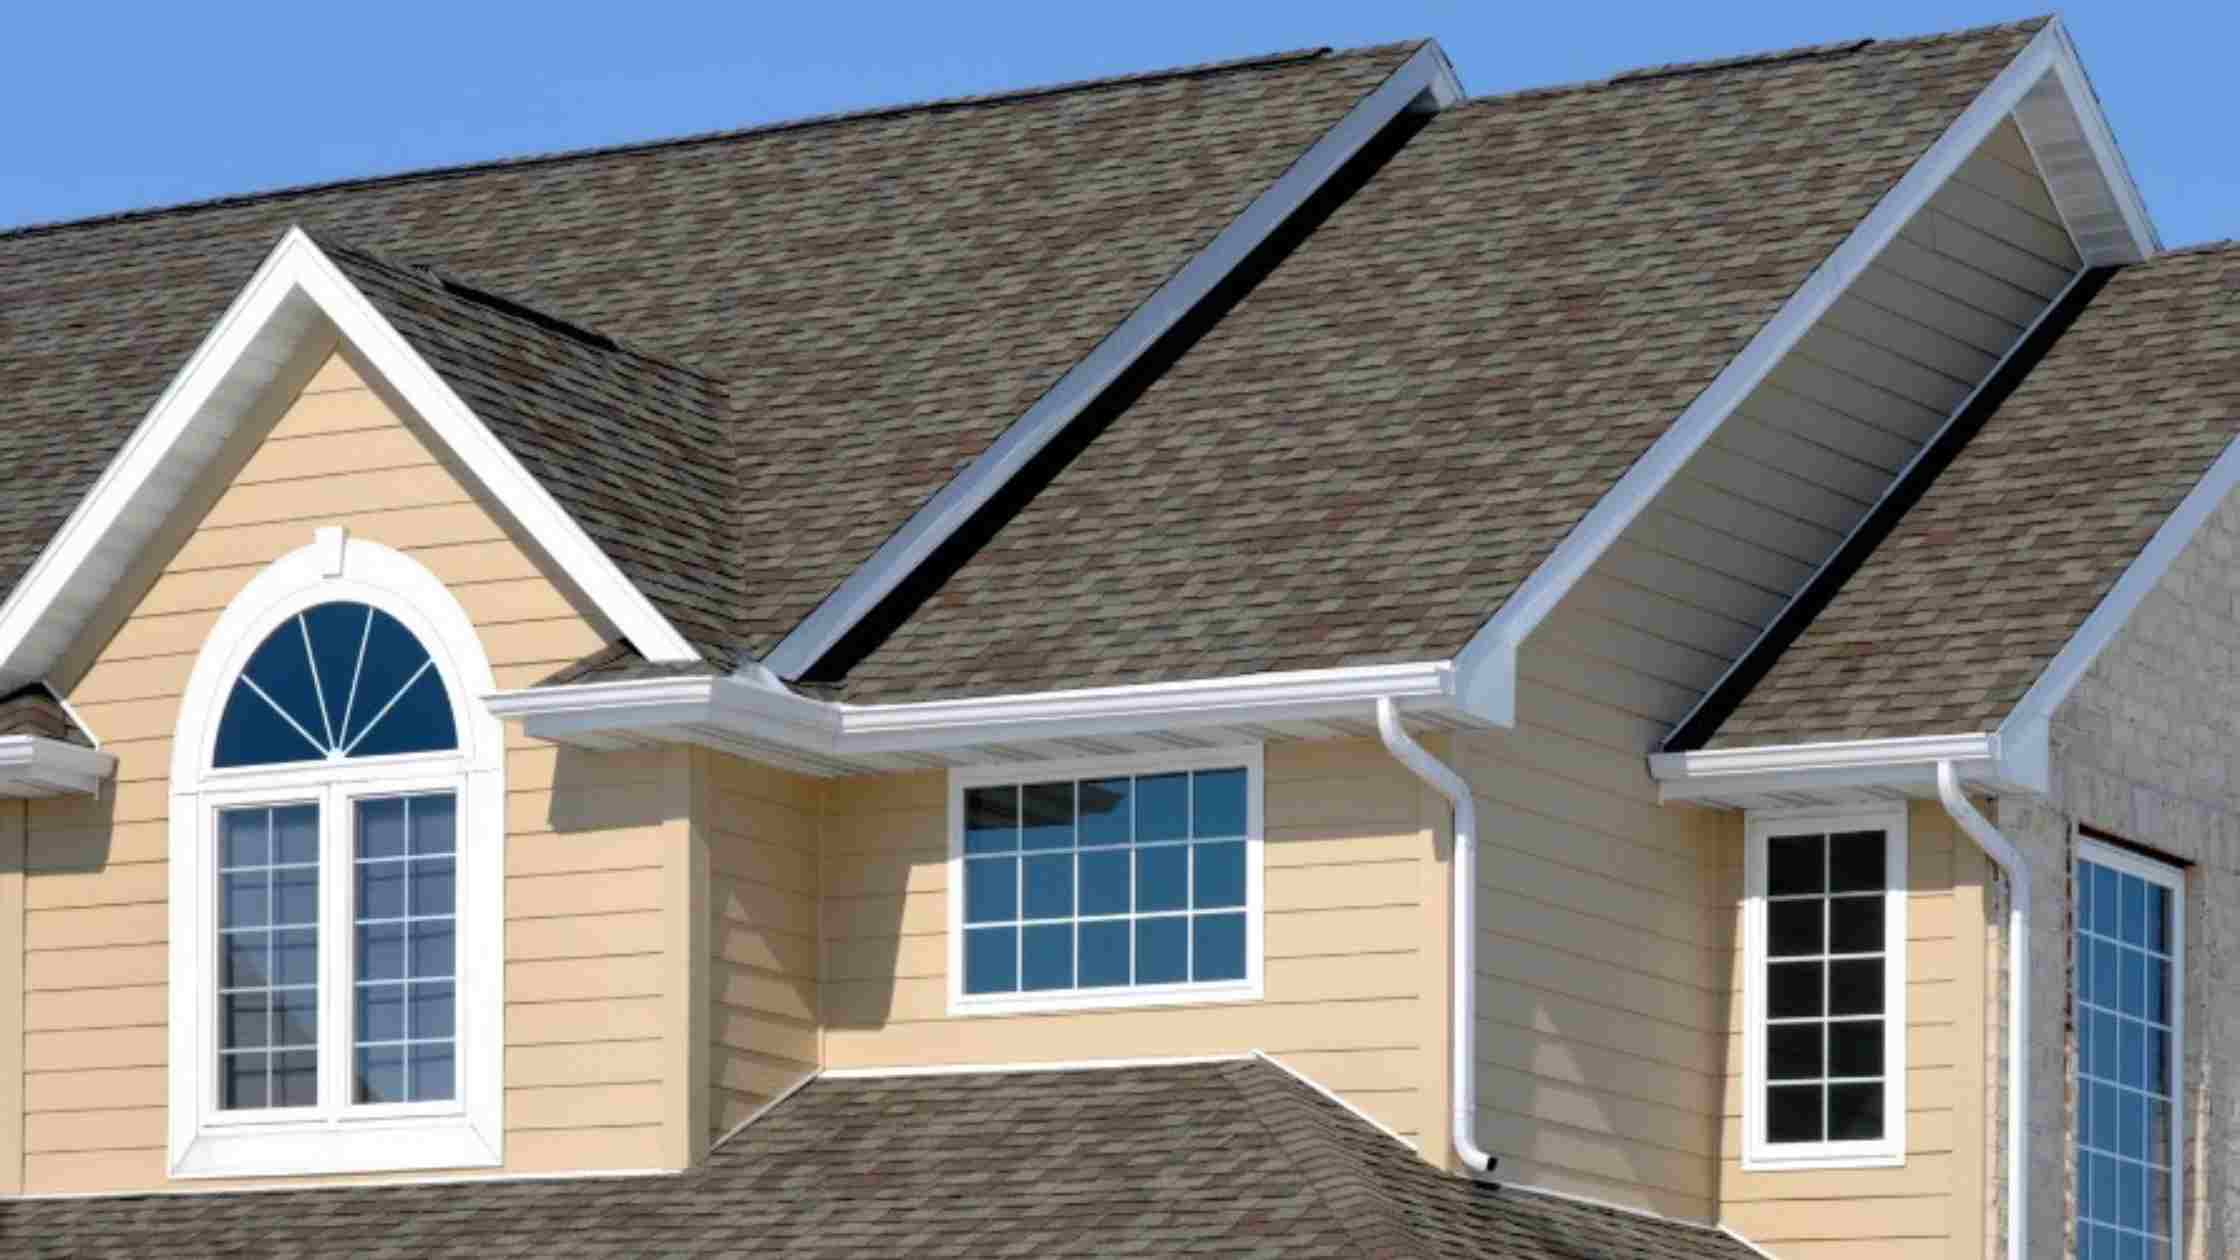 Can You Use Roofing Nails for Siding